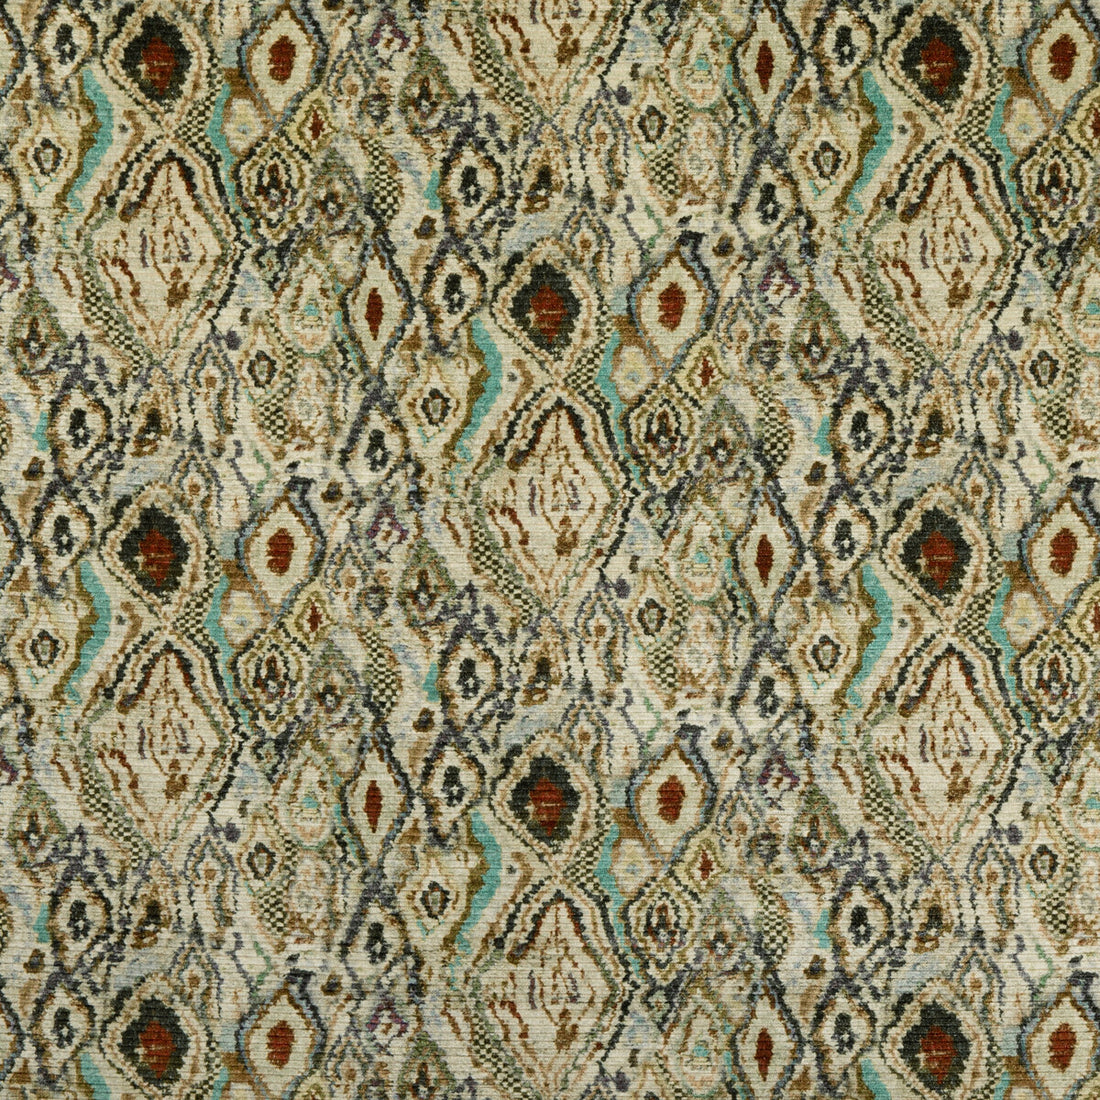 Paint Box fabric in sage color - pattern FD313.S108.0 - by Mulberry in the Modern Country Velvets collection